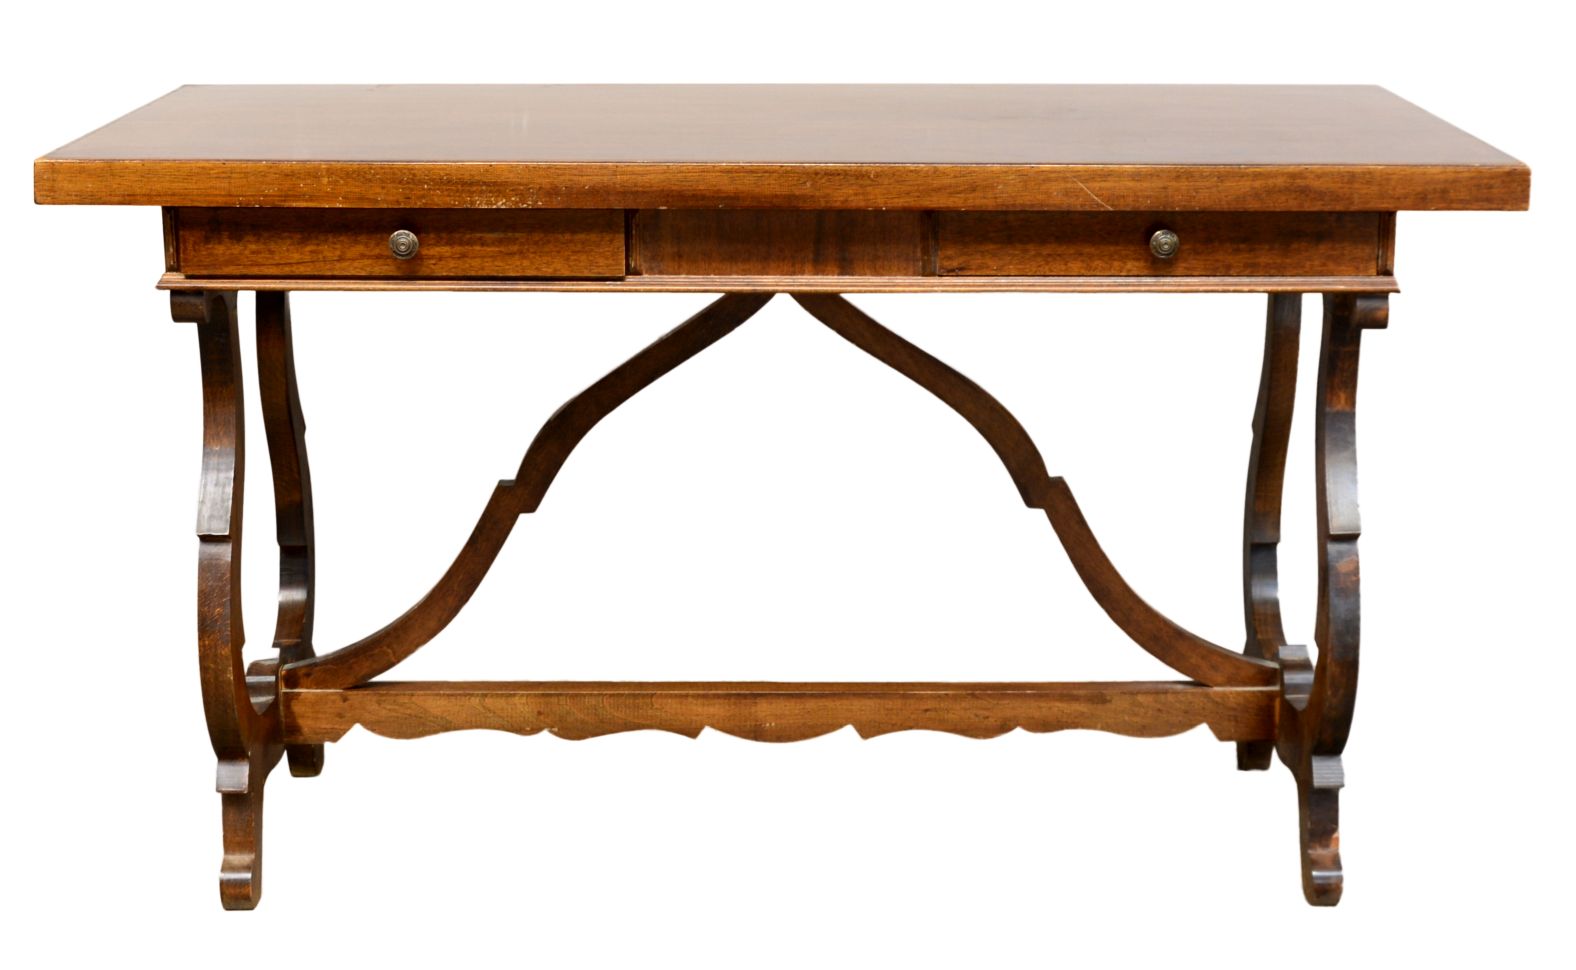 French writing desk. Formal reproduction furniture.